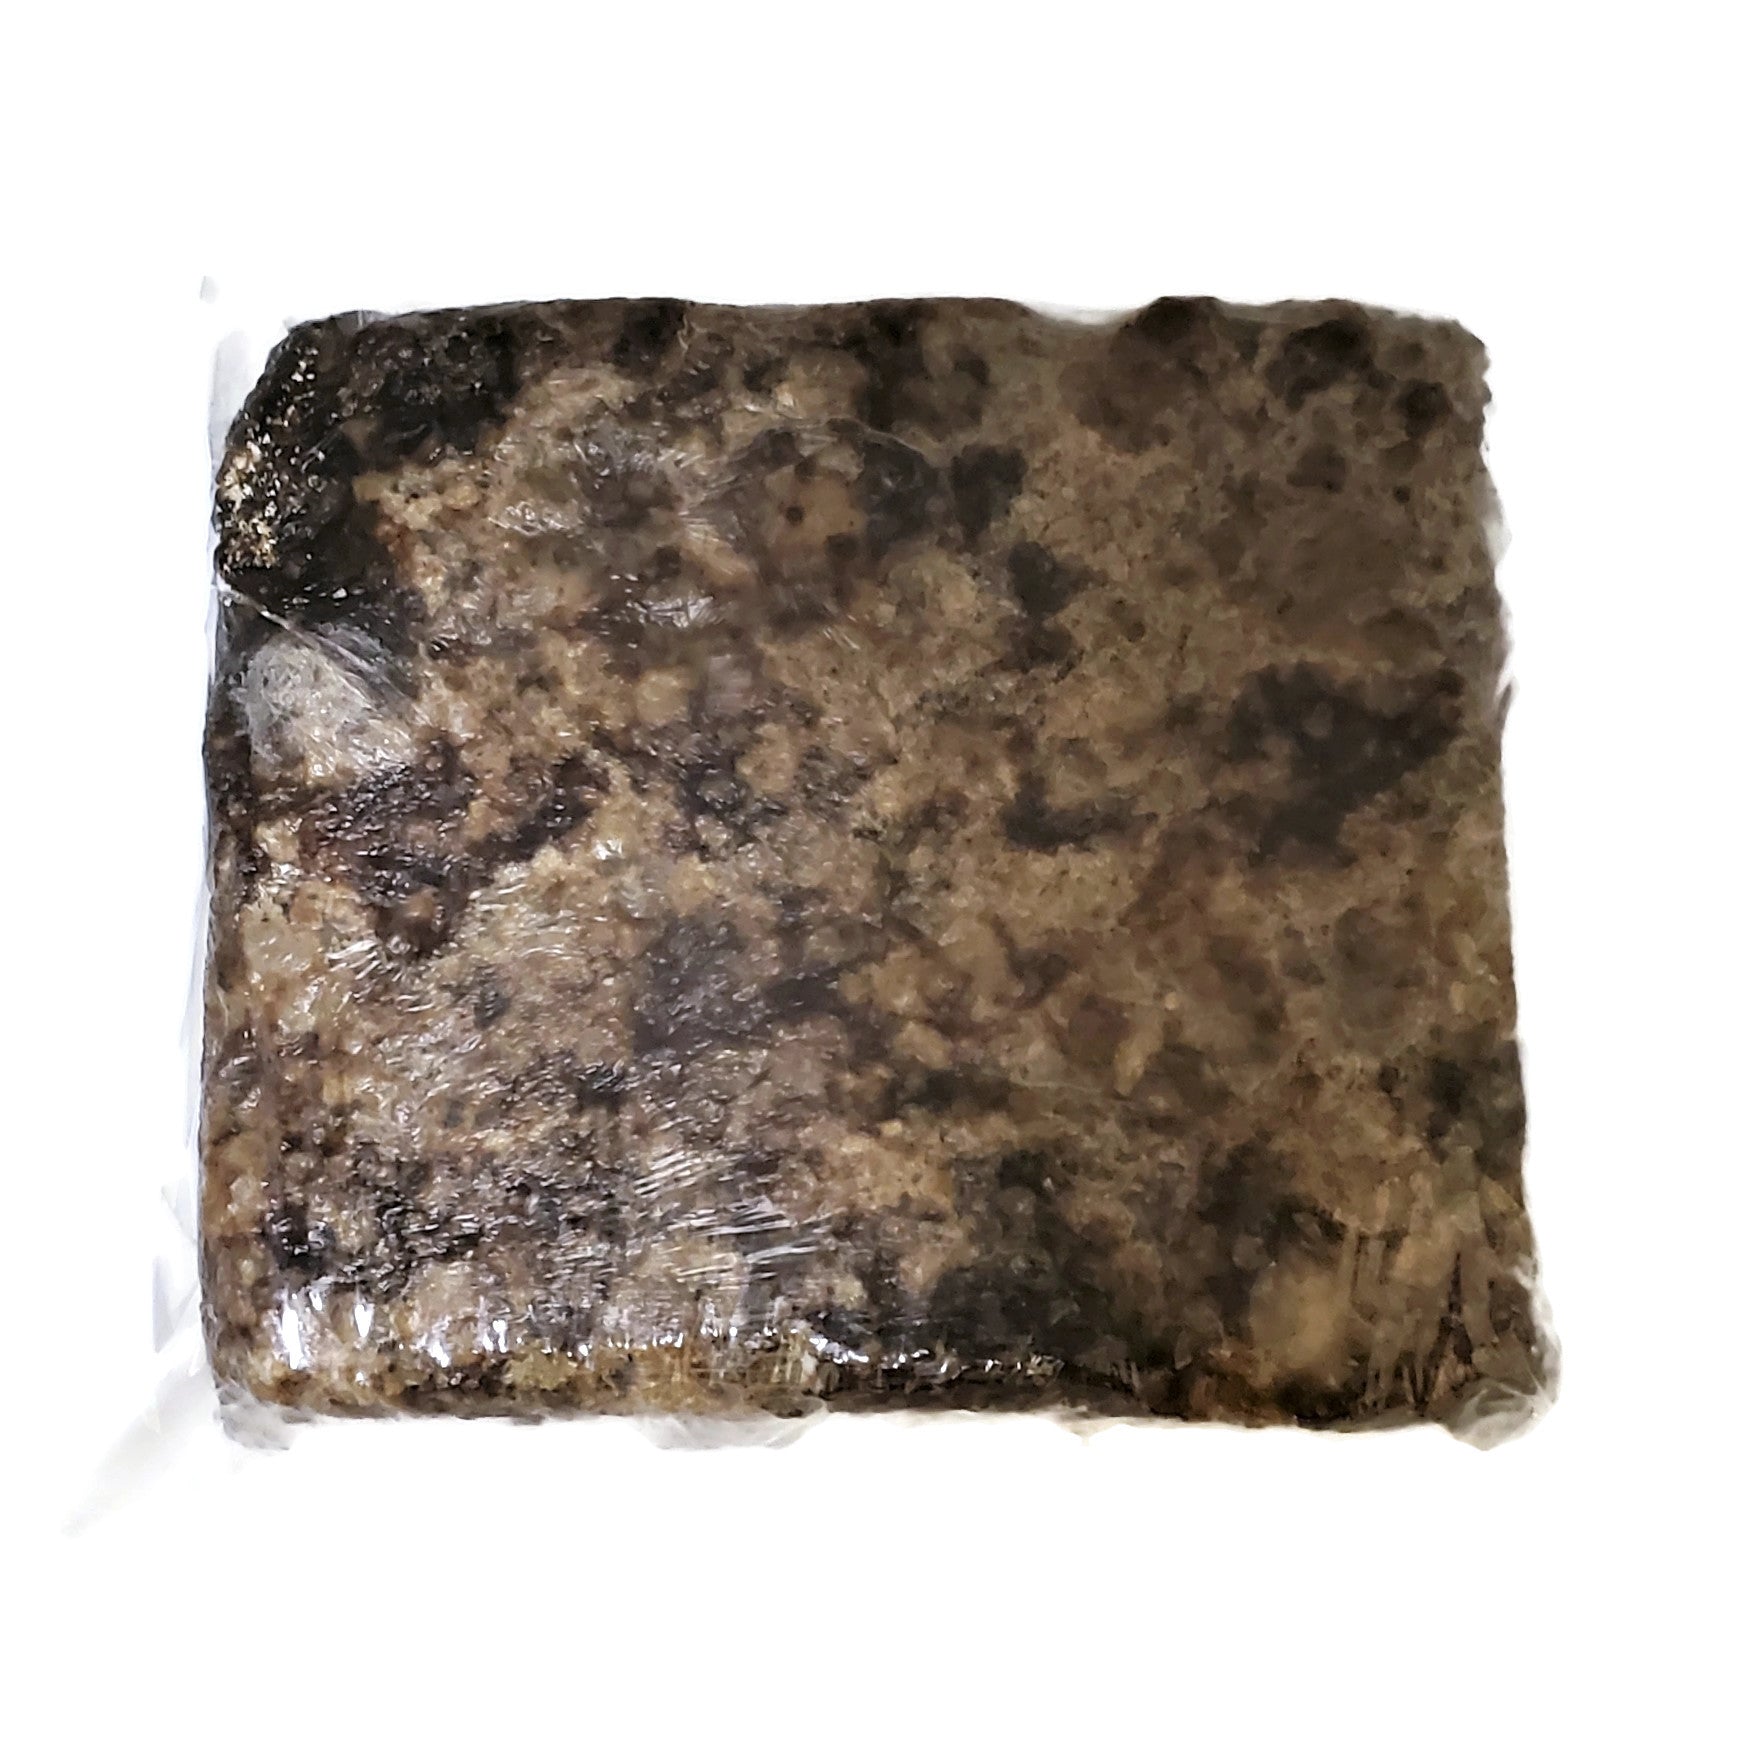 a 1.75 pound block of raw african black soap